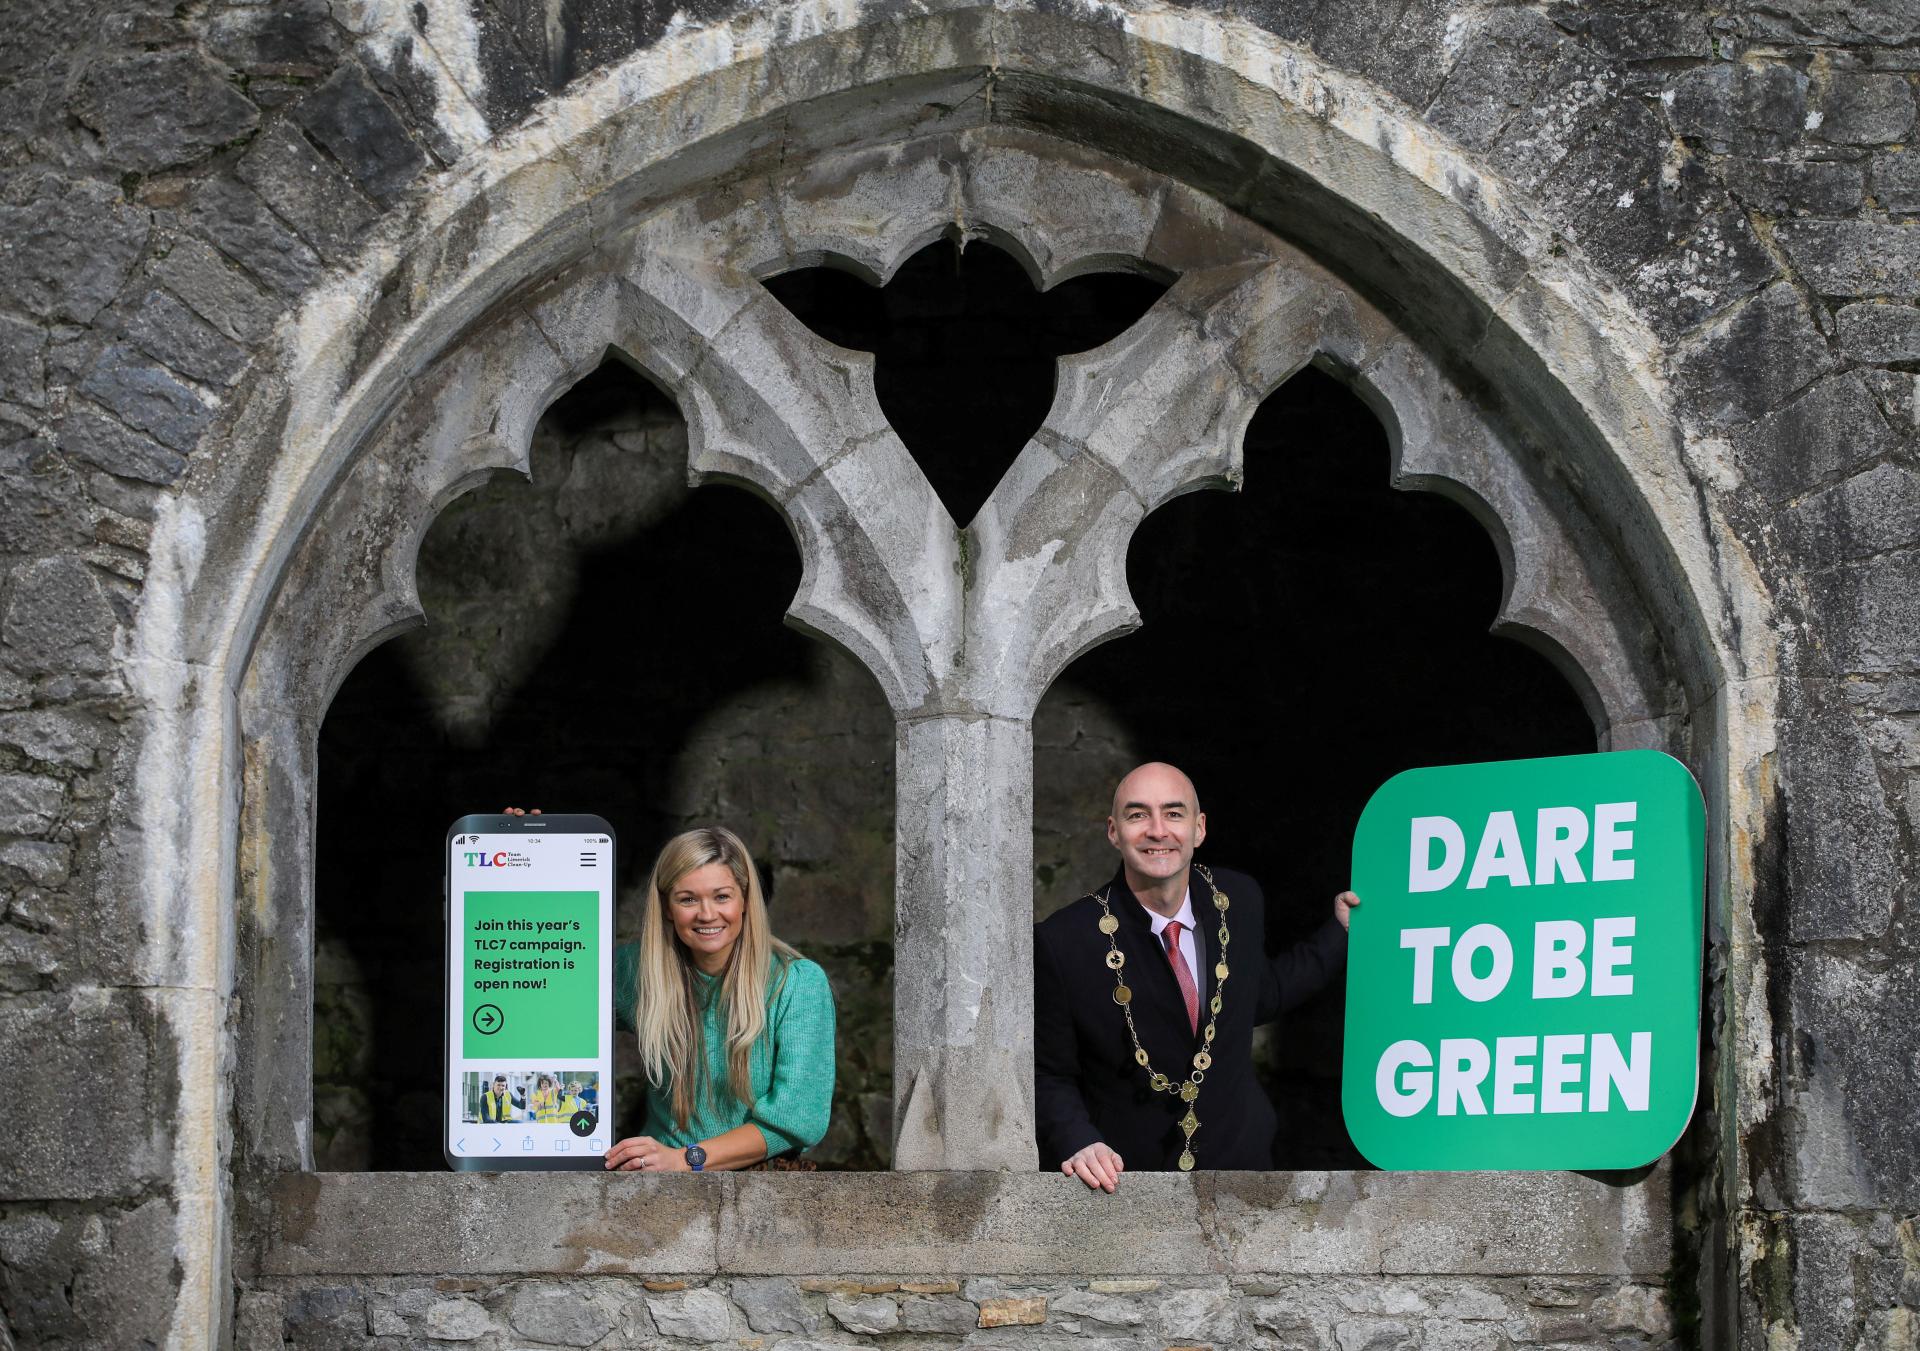 Aoife Sheehan and Mayor of Limerick Cllr. Daniel Butler